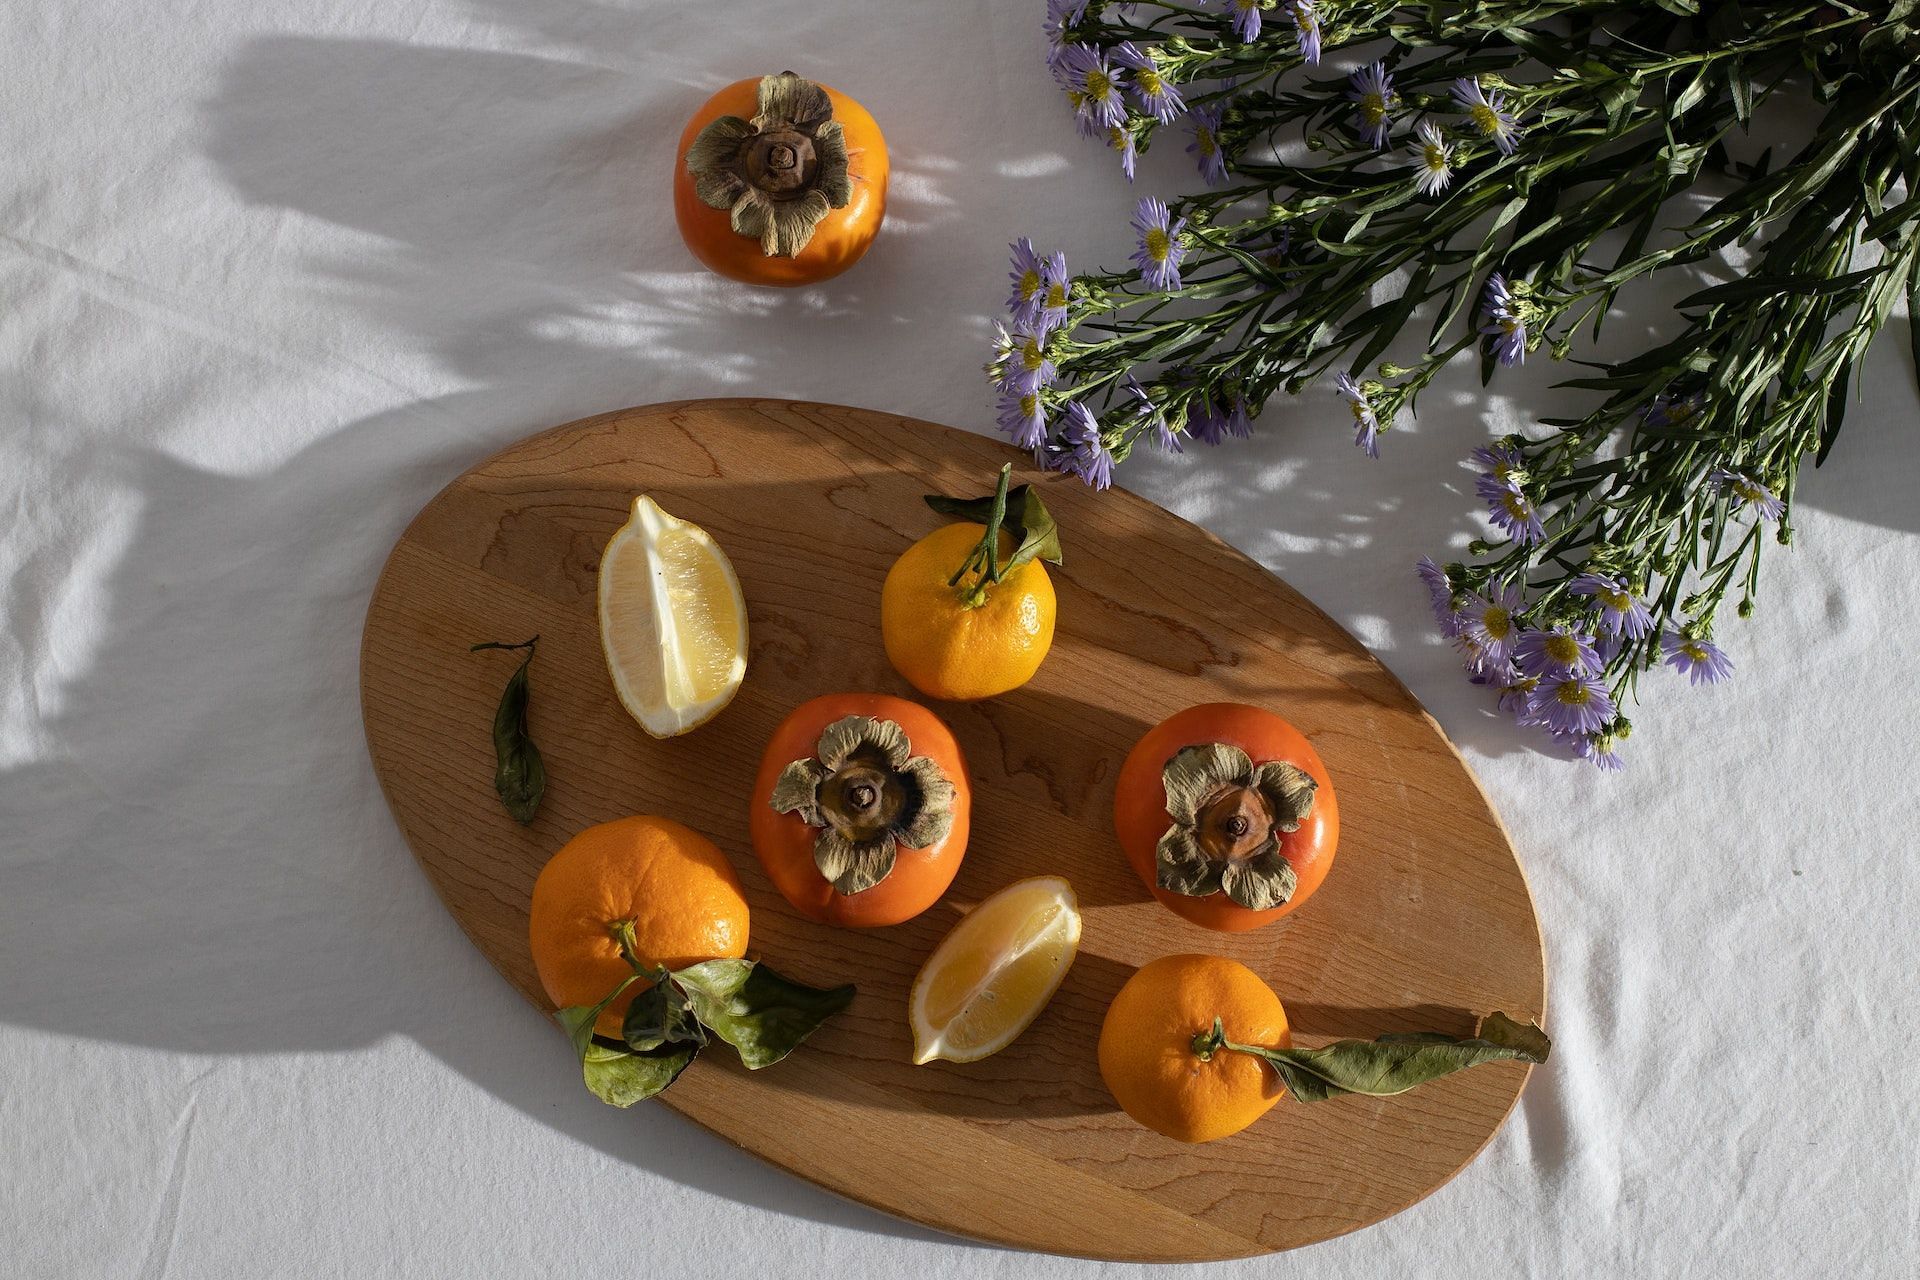 Persimmons are packed with nutrients. (Photo via Pexels/Jill Burrow)